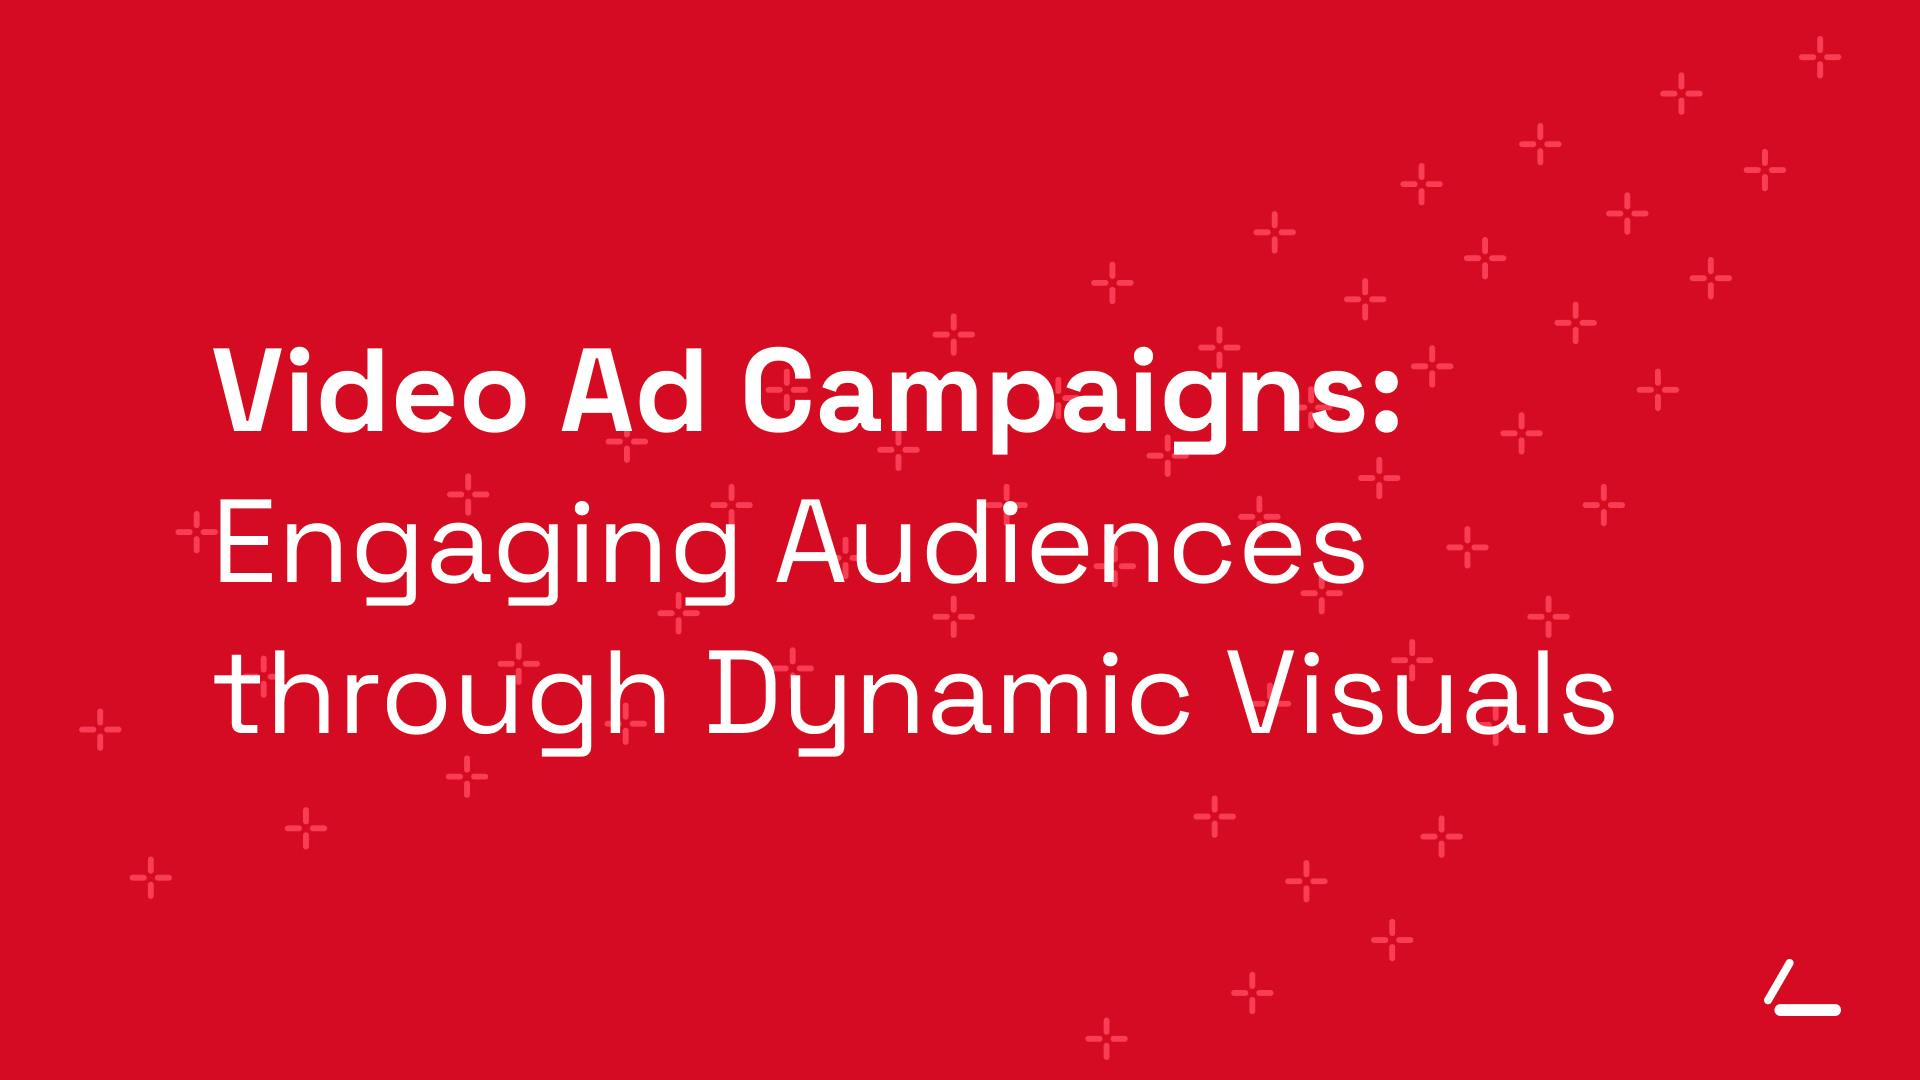 SEO Article Header - Red background with text about Video Ad Campaigns